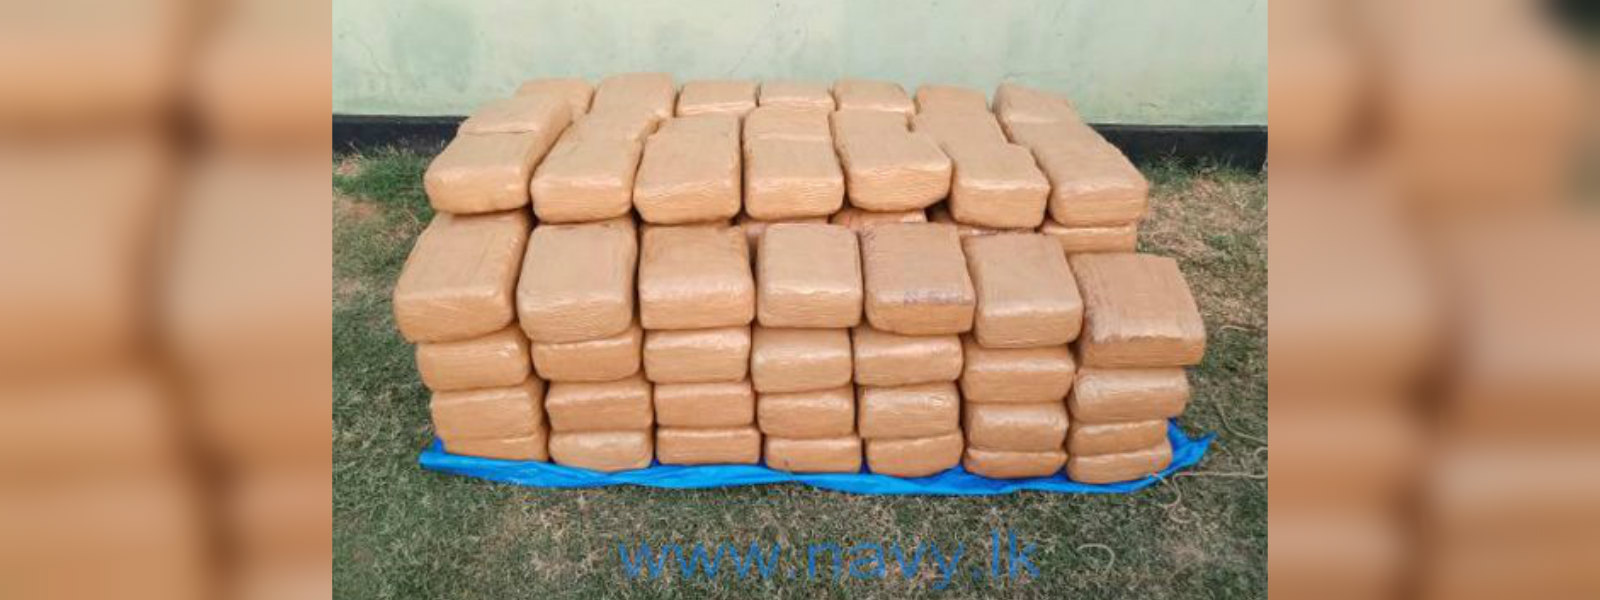 Navy recovers 300kg of Kerala cannabis from Jaffna